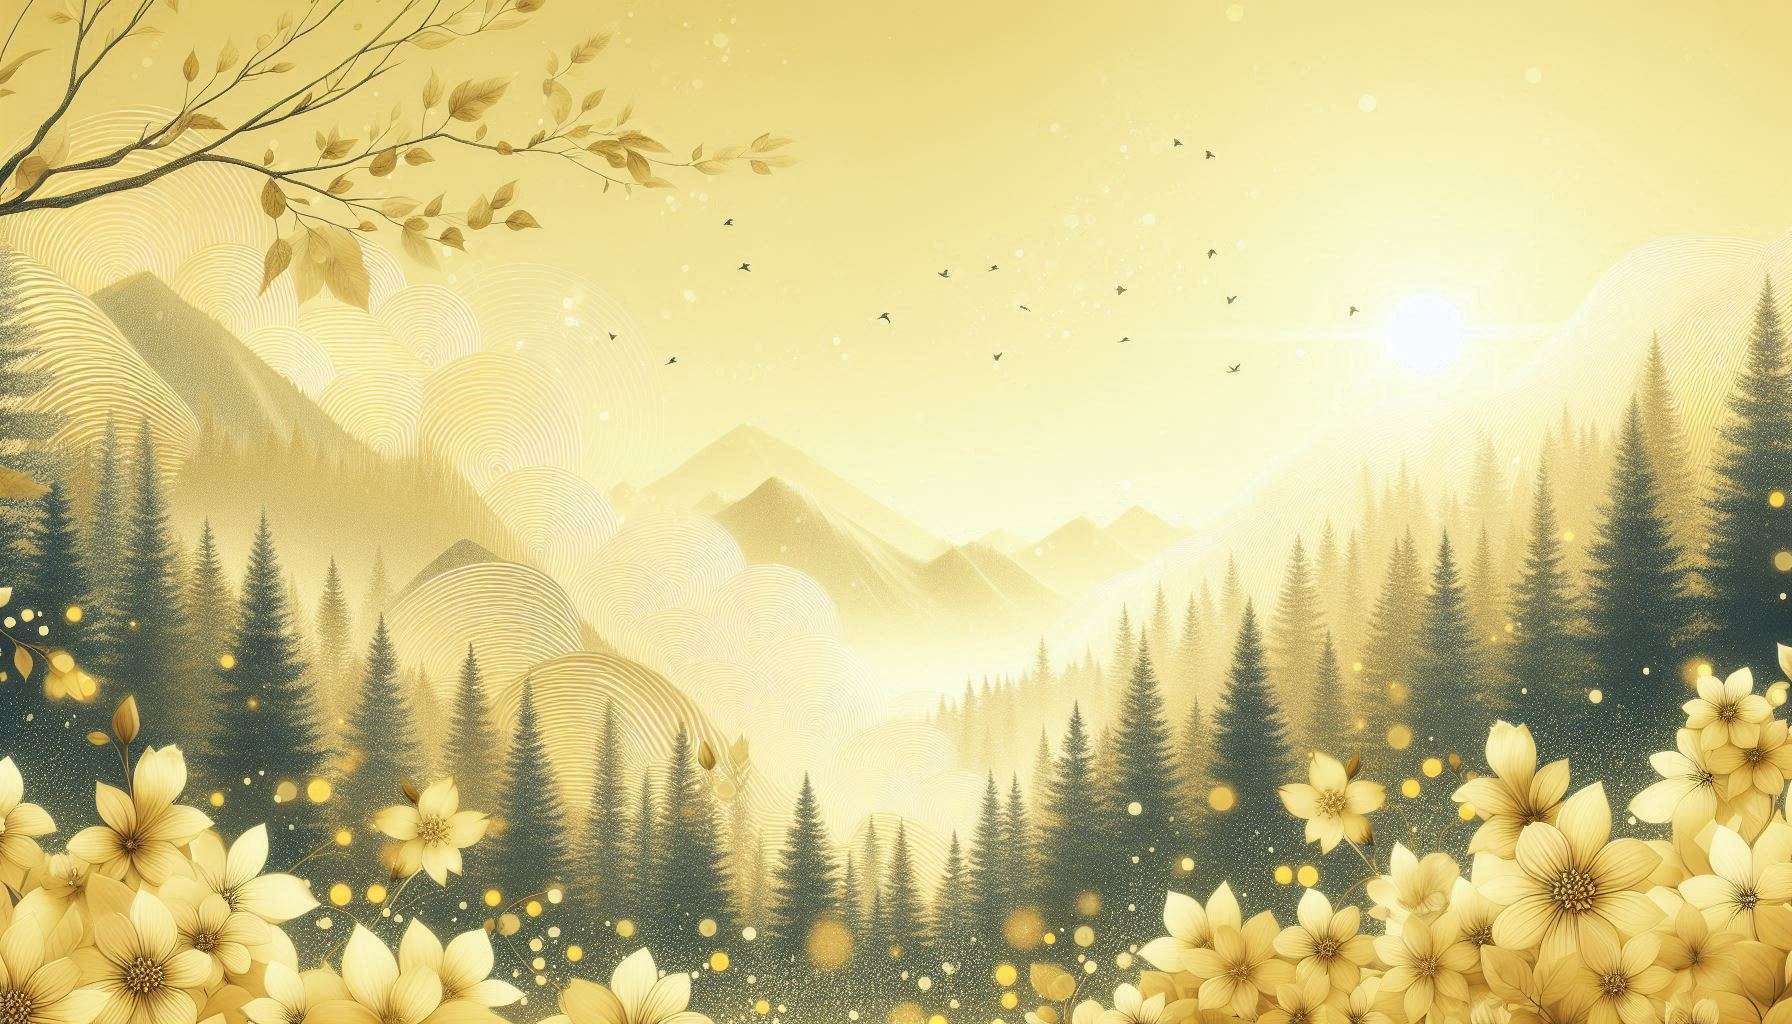 Download Free light yellow background with flower wallpaper for websites, slideshows, and designs | royalty-free and unlimited use.